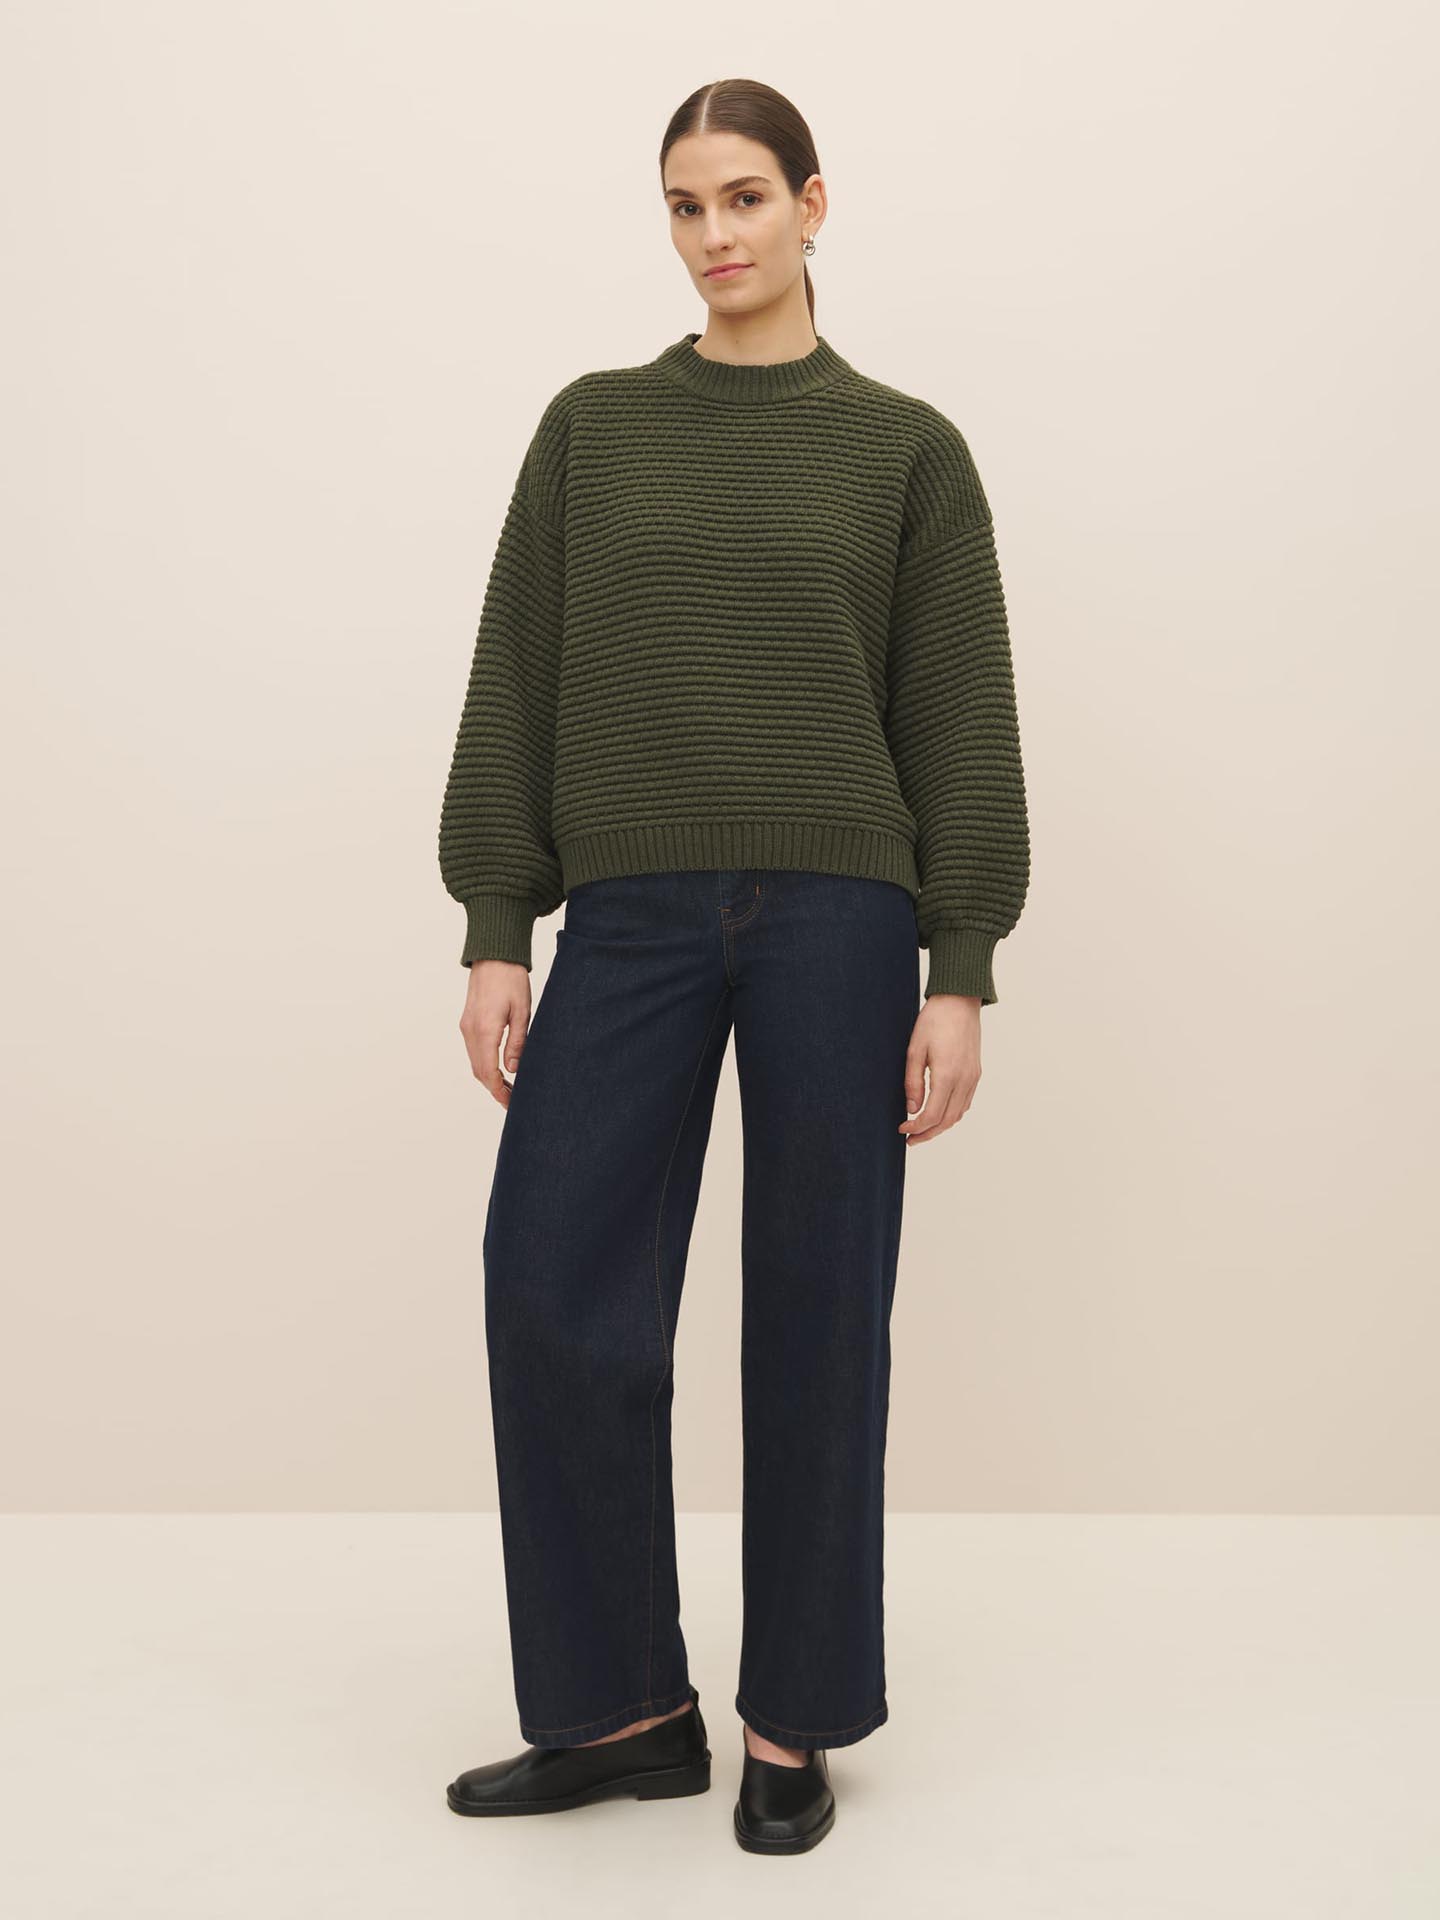 Woman standing against a neutral background, wearing a Kowtow Bubble Jumper in Khaki Marle and dark blue jeans with black loafers.